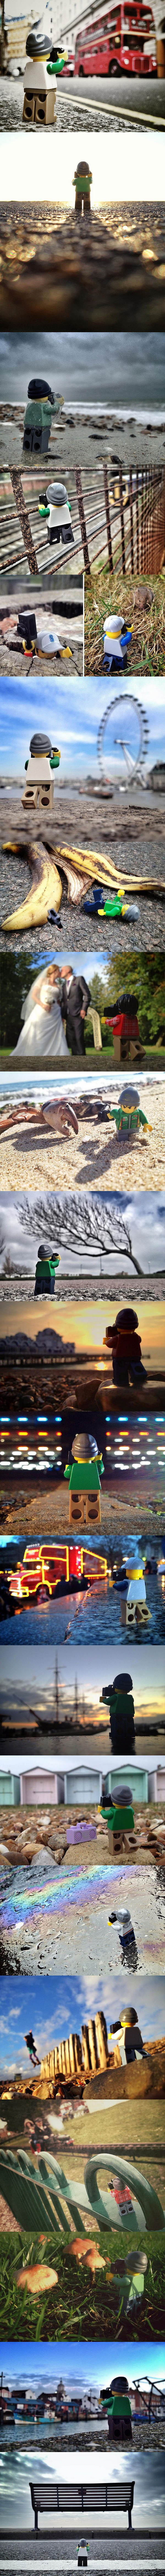 photographer captures the world from the perspective of a lego man